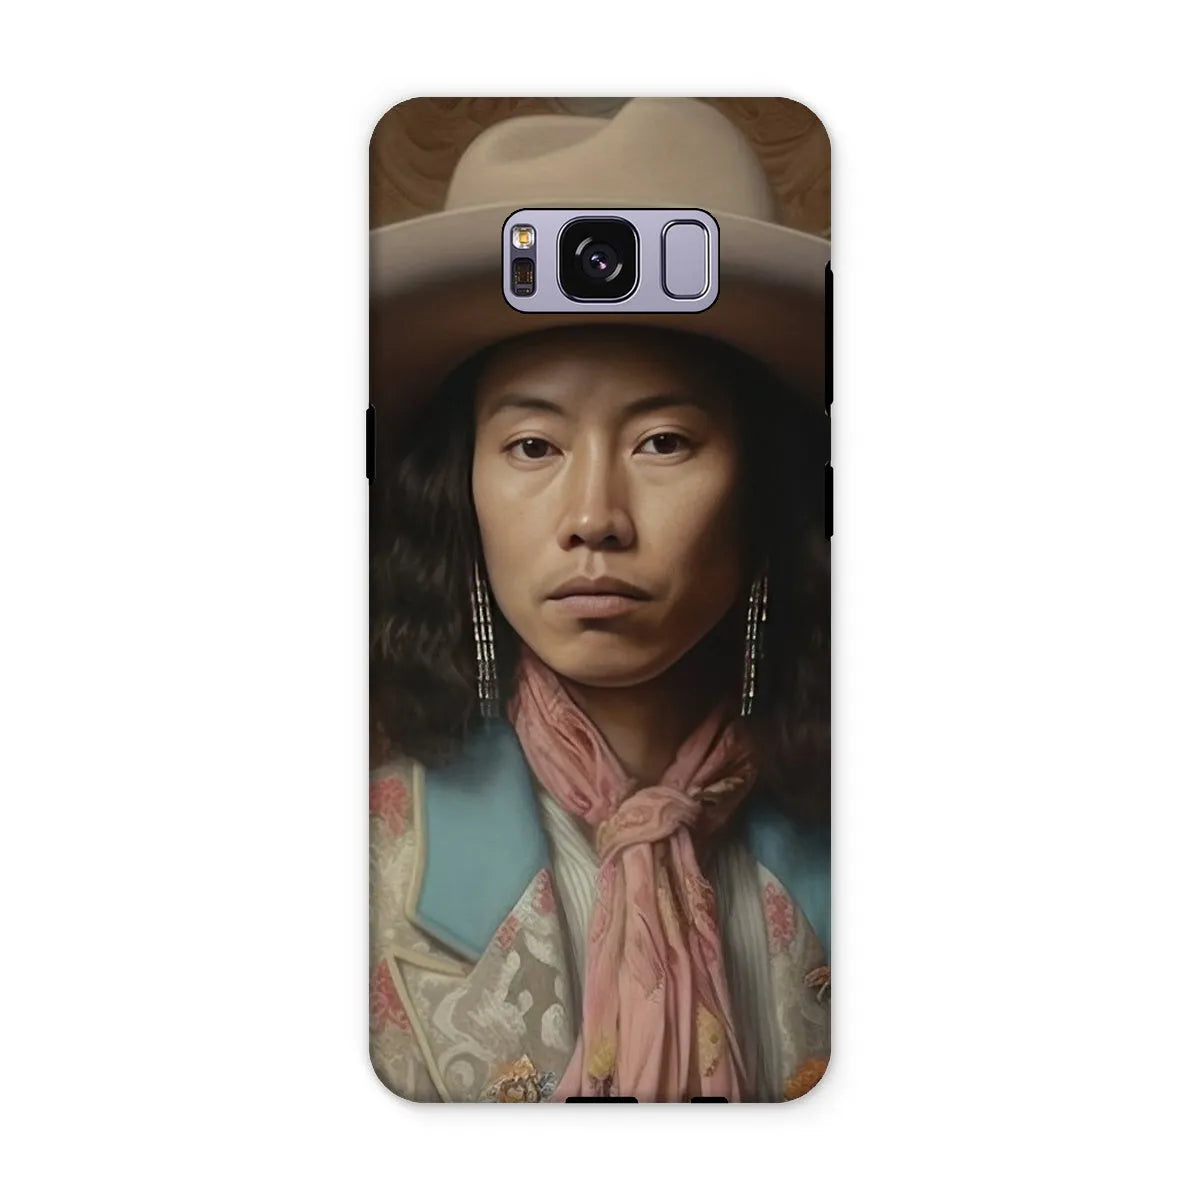 Dorjee The Gay Cowboy - Dandy Gay Aesthetic Art Phone Case - Samsung Galaxy S8 Plus / Matte - Mobile Phone Cases